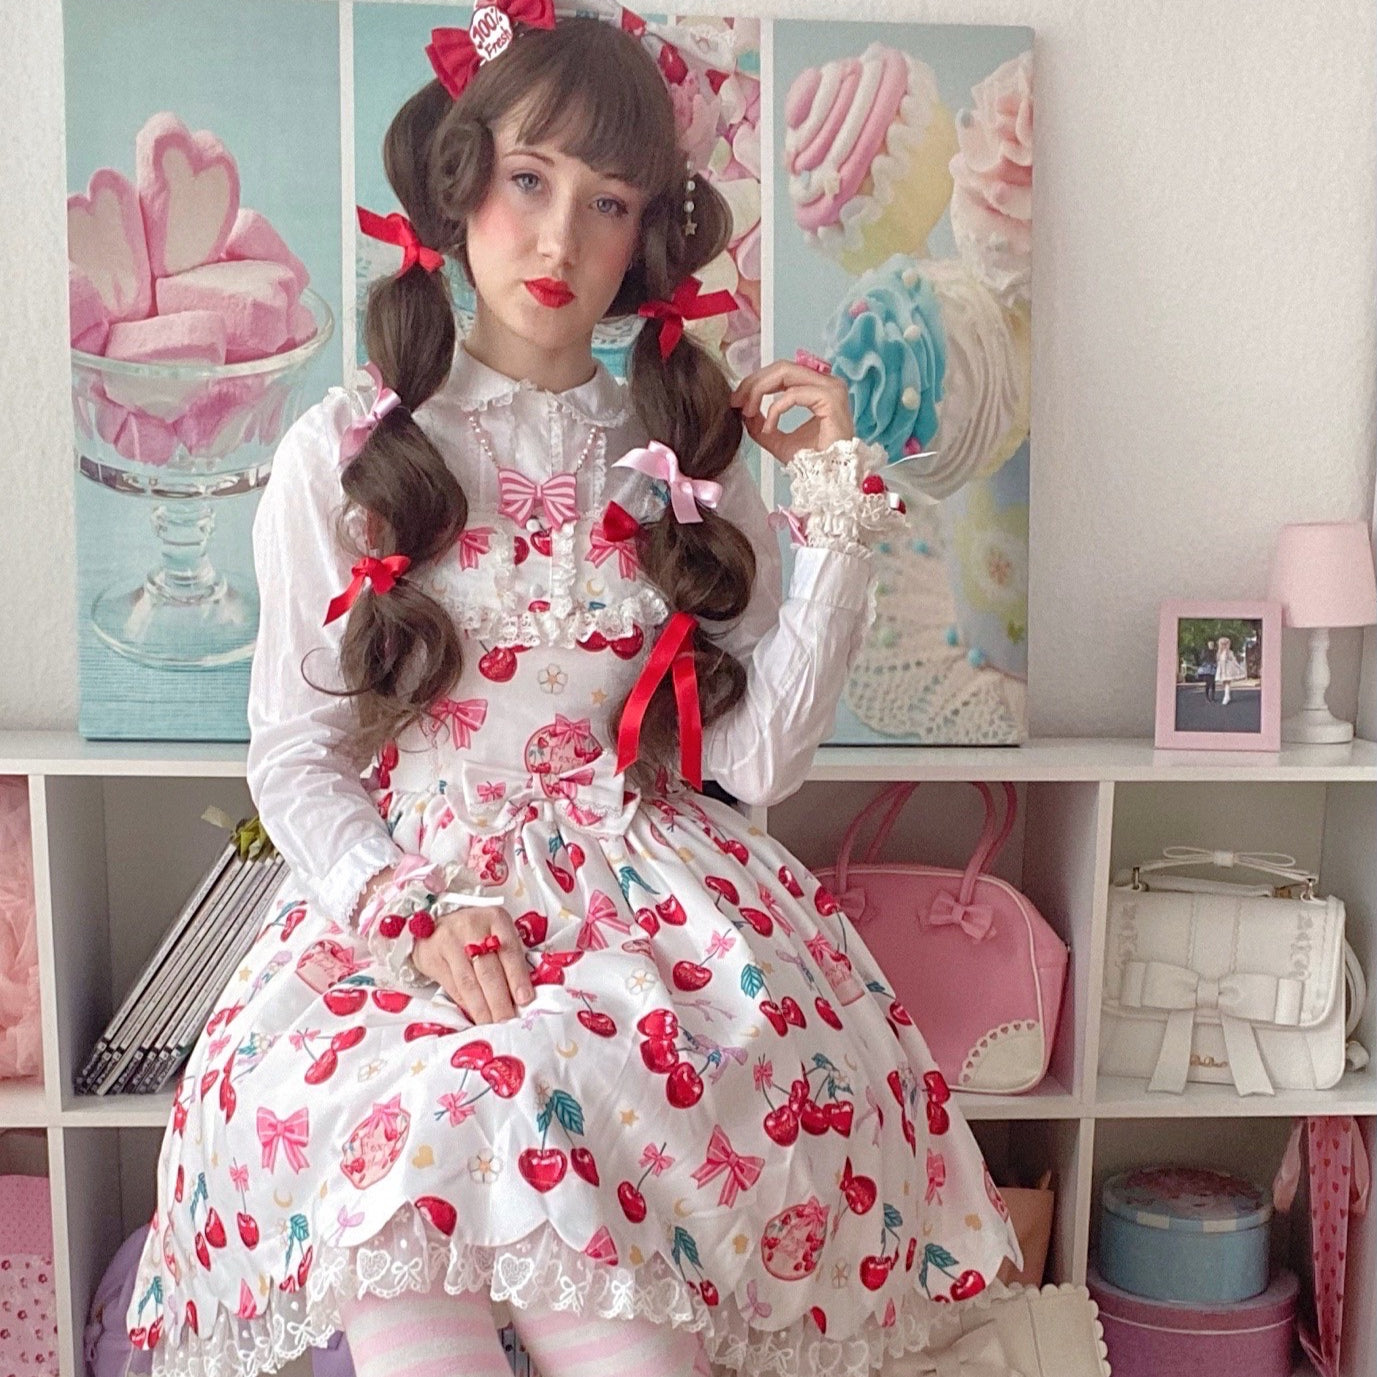 Scalloped Lace Doll JSK by Angelic Pretty